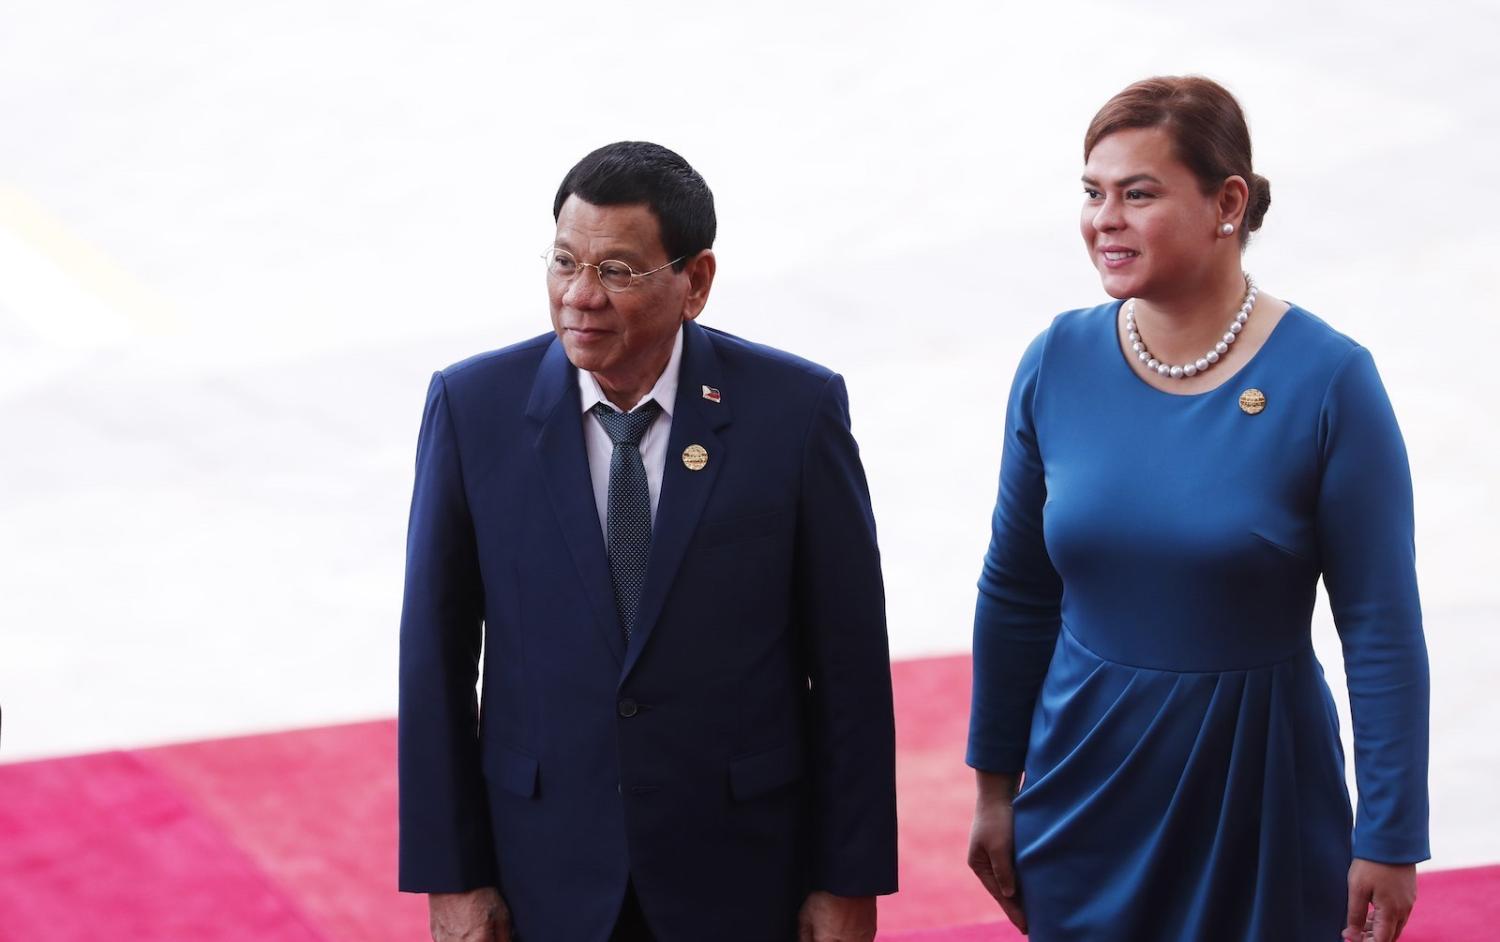 Philippines President Rodrigo Duterte (L) and daughter Sara Duterte at the Boao Forum for Asia Conference 2018, in China's Hainan province, April 2018 (AFP via Getty Images)